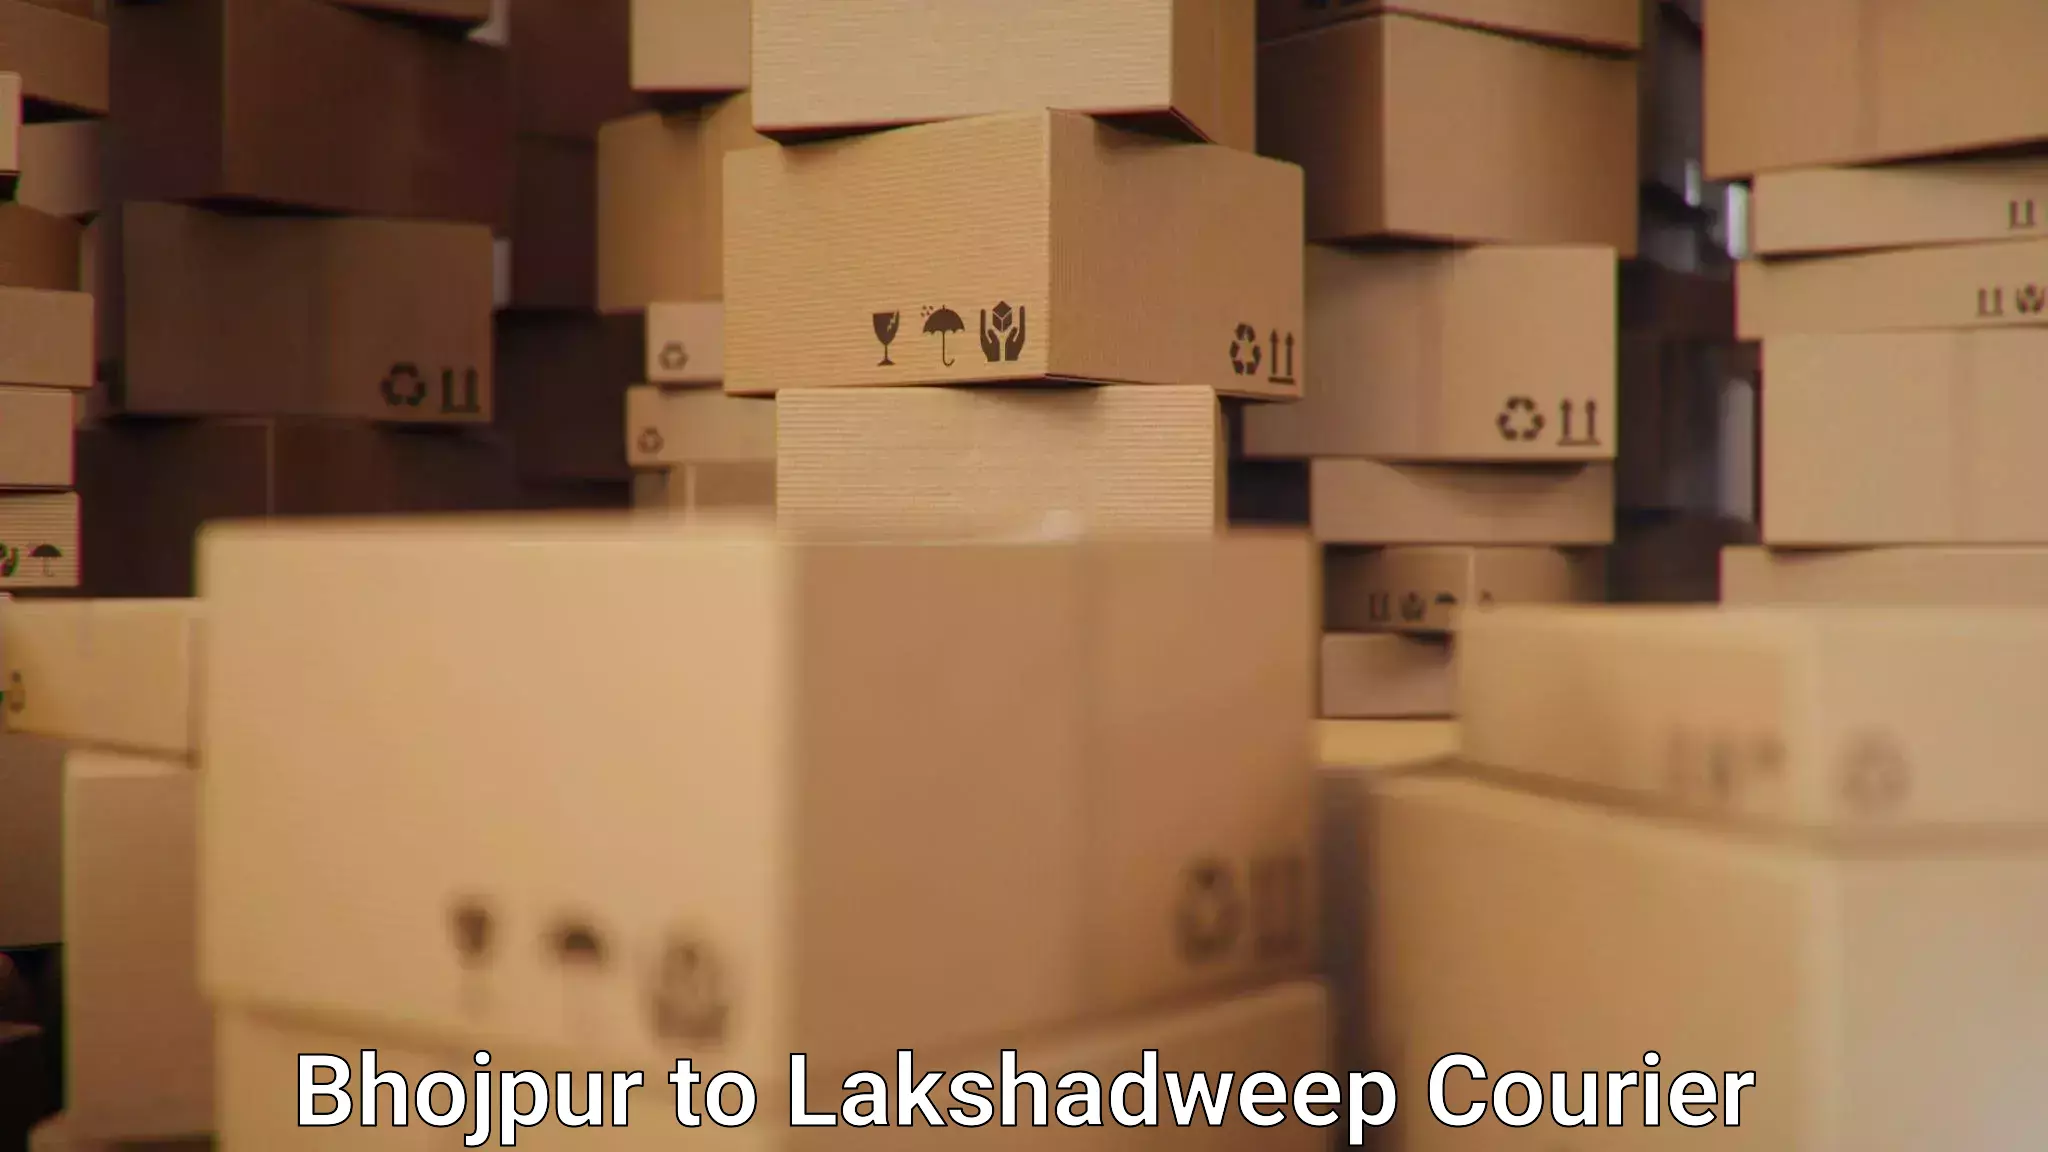 Efficient shipping operations Bhojpur to Lakshadweep